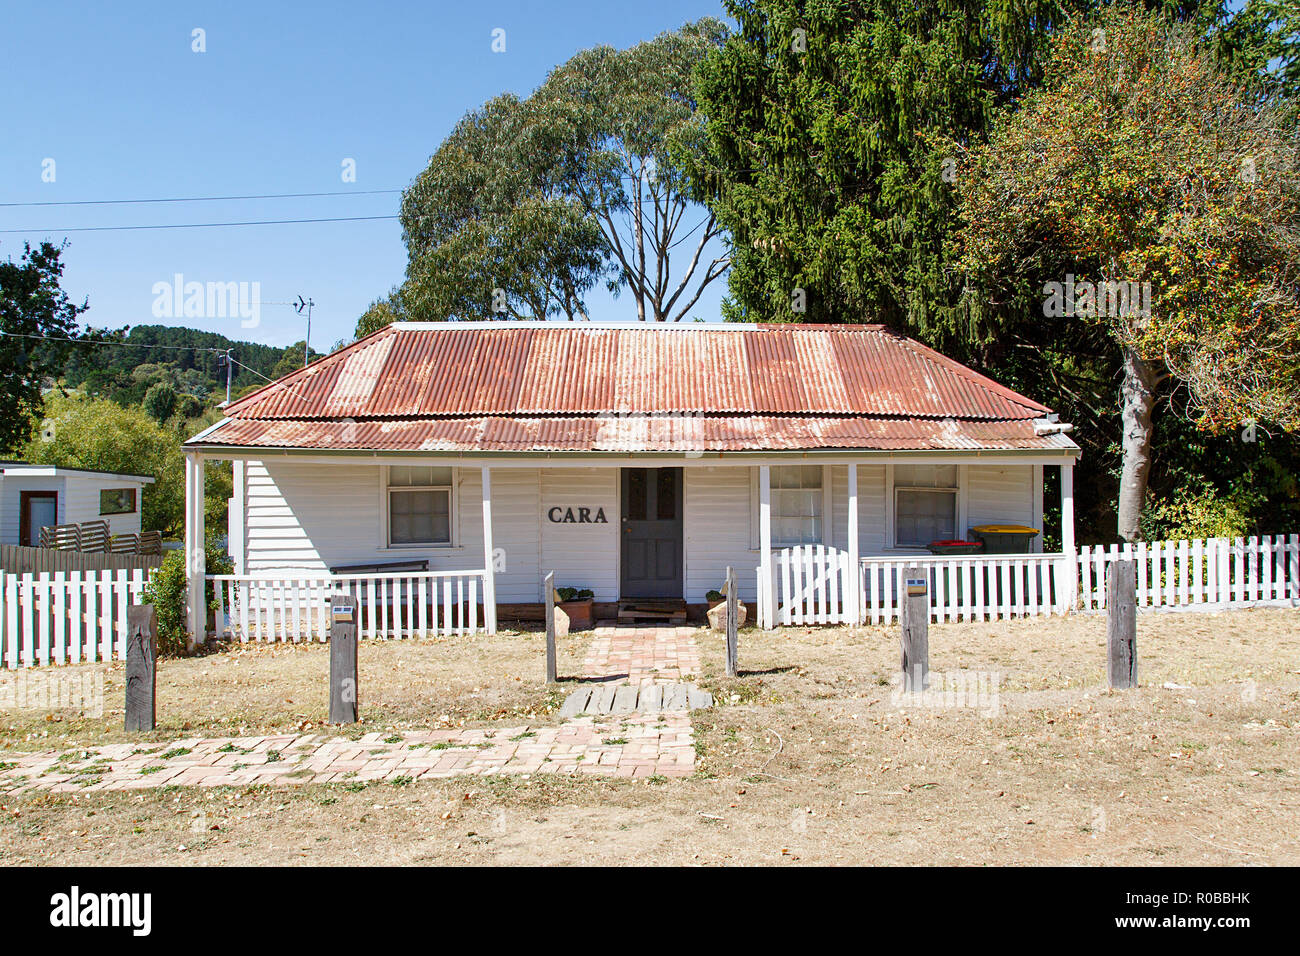 Melbourne, Australia: March 23, 2018: Typical detached double fronted bungalow home with a corrugated roof picket fence and verandah in Daylesford. Stock Photo